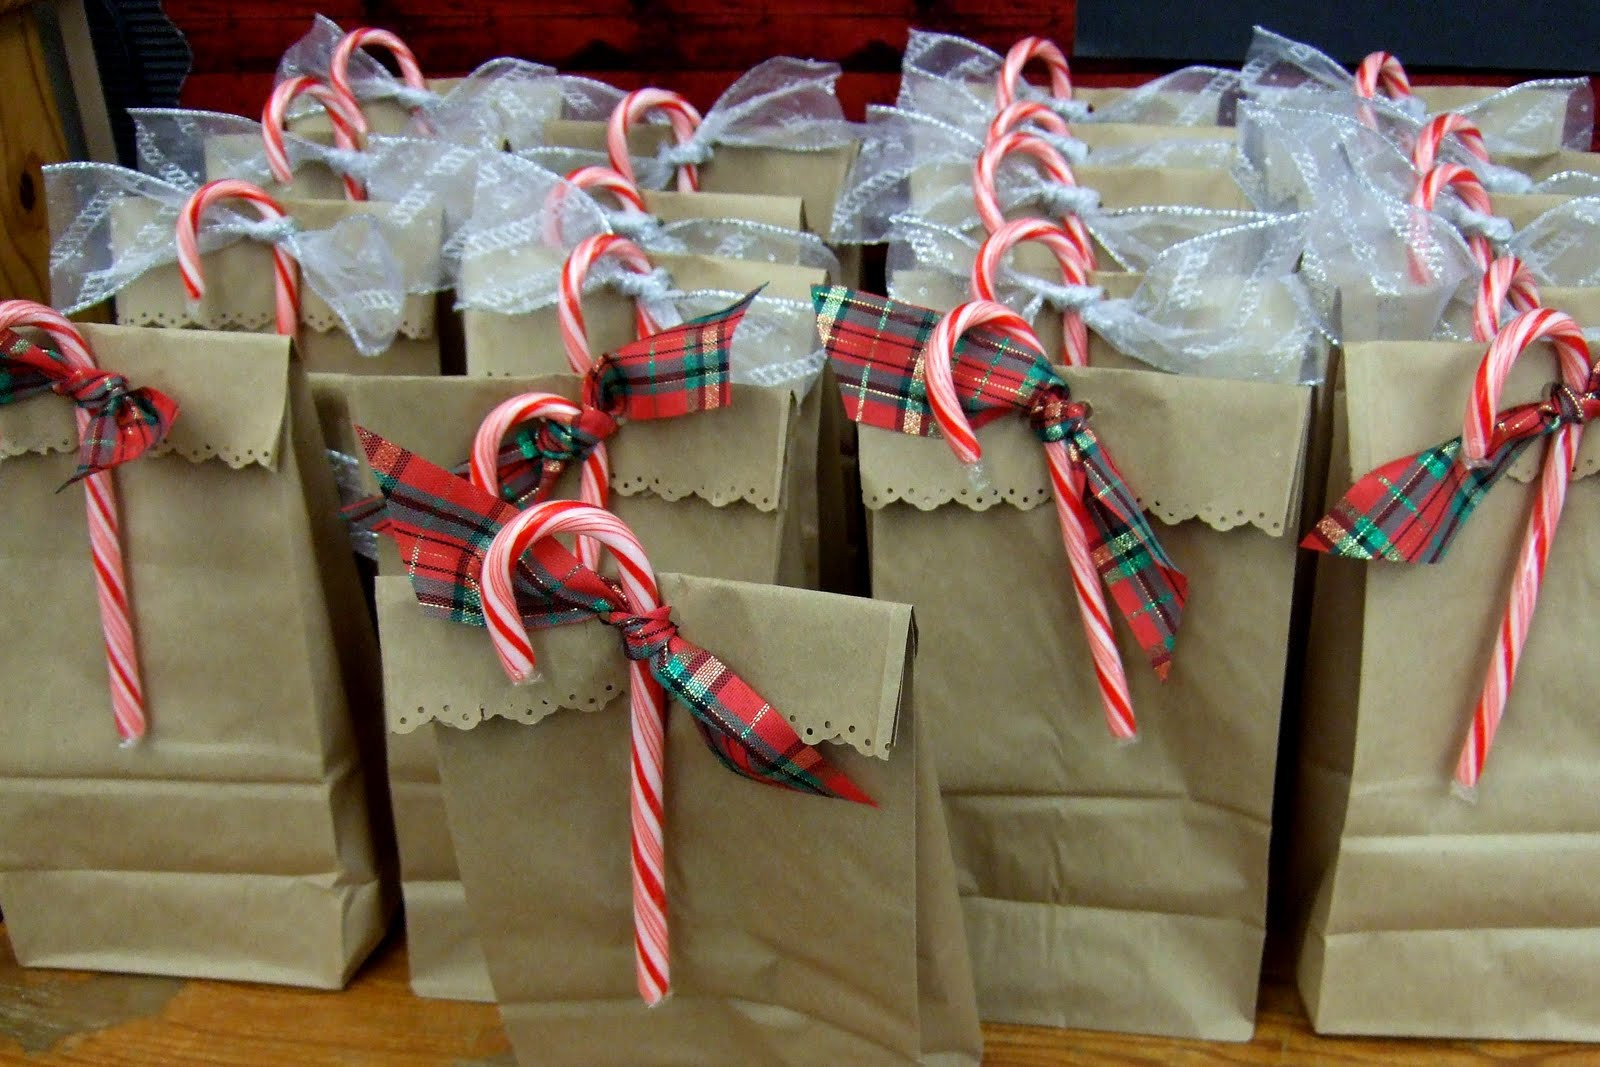 Christmas Gift Ideas For Students
 The Inspired Classroom Student Gifts Wrapped Pinterest Style